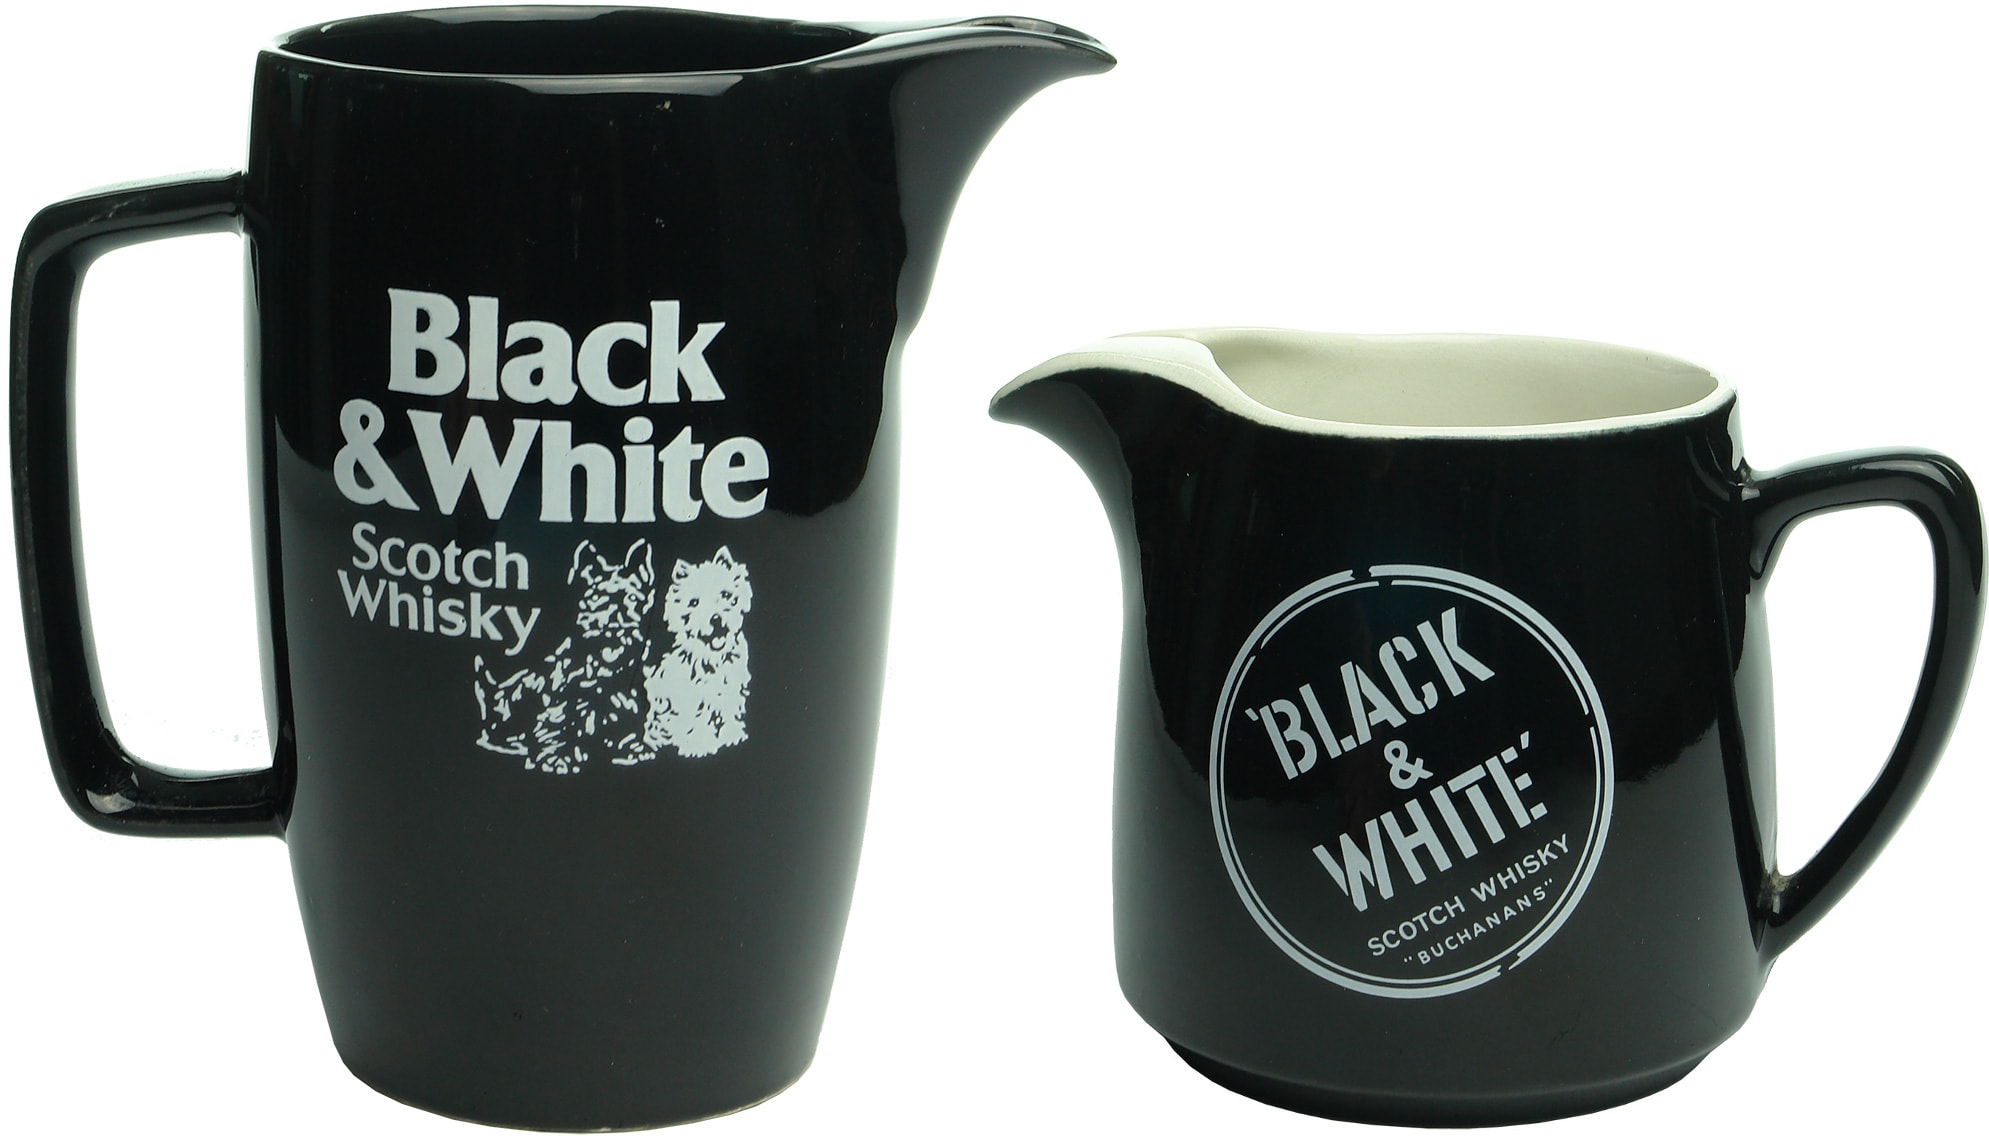 Black and White Scotch Whisky Water Jugs